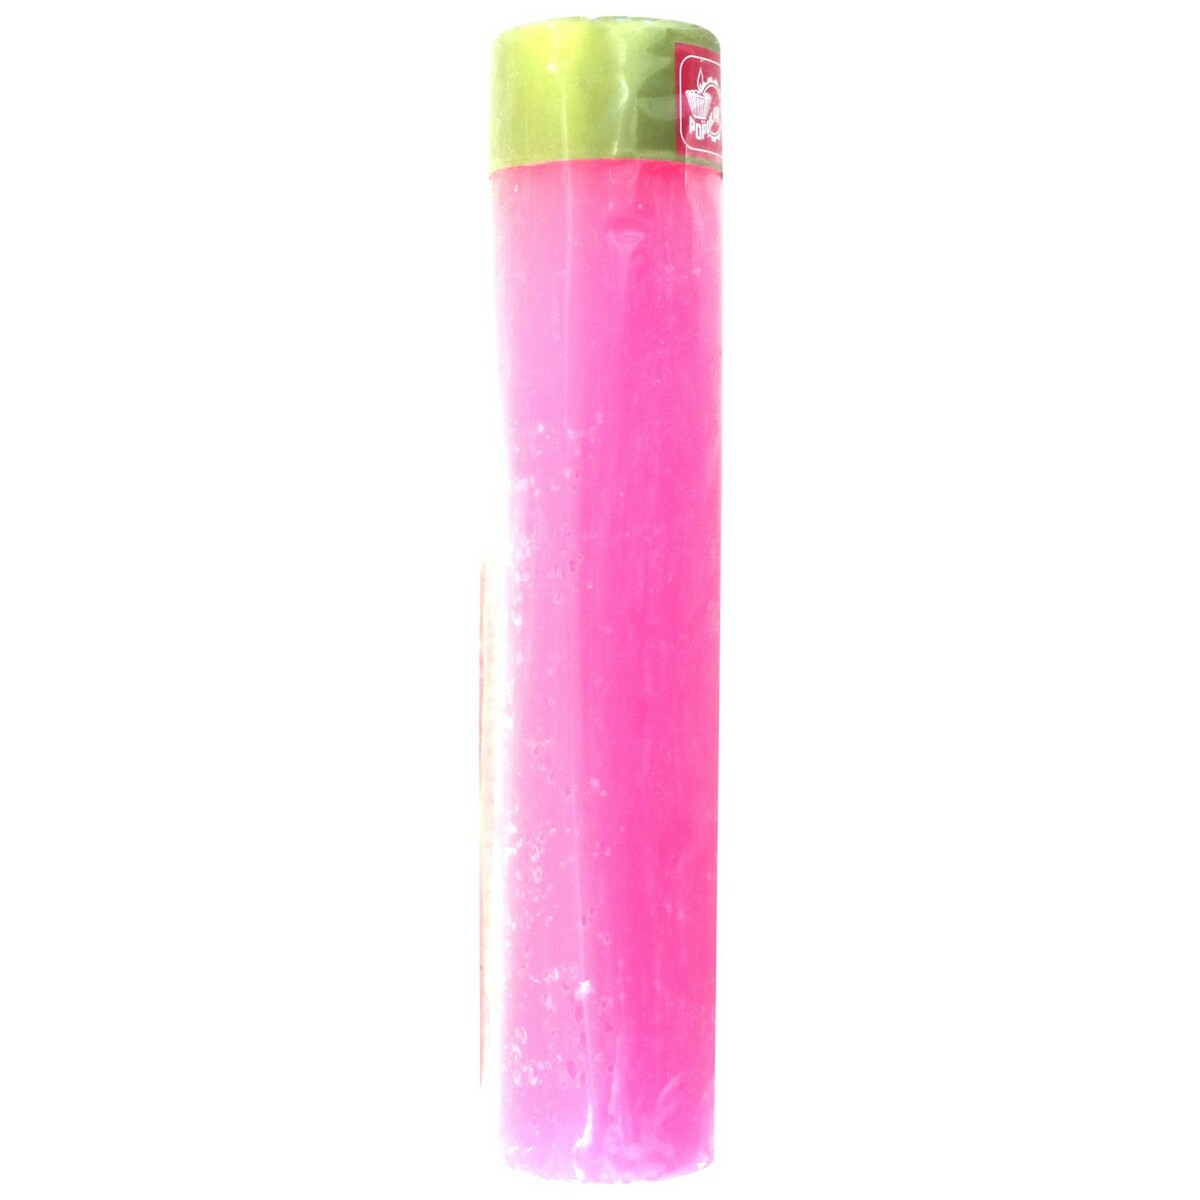 Popular Candle Torch 250g 1's